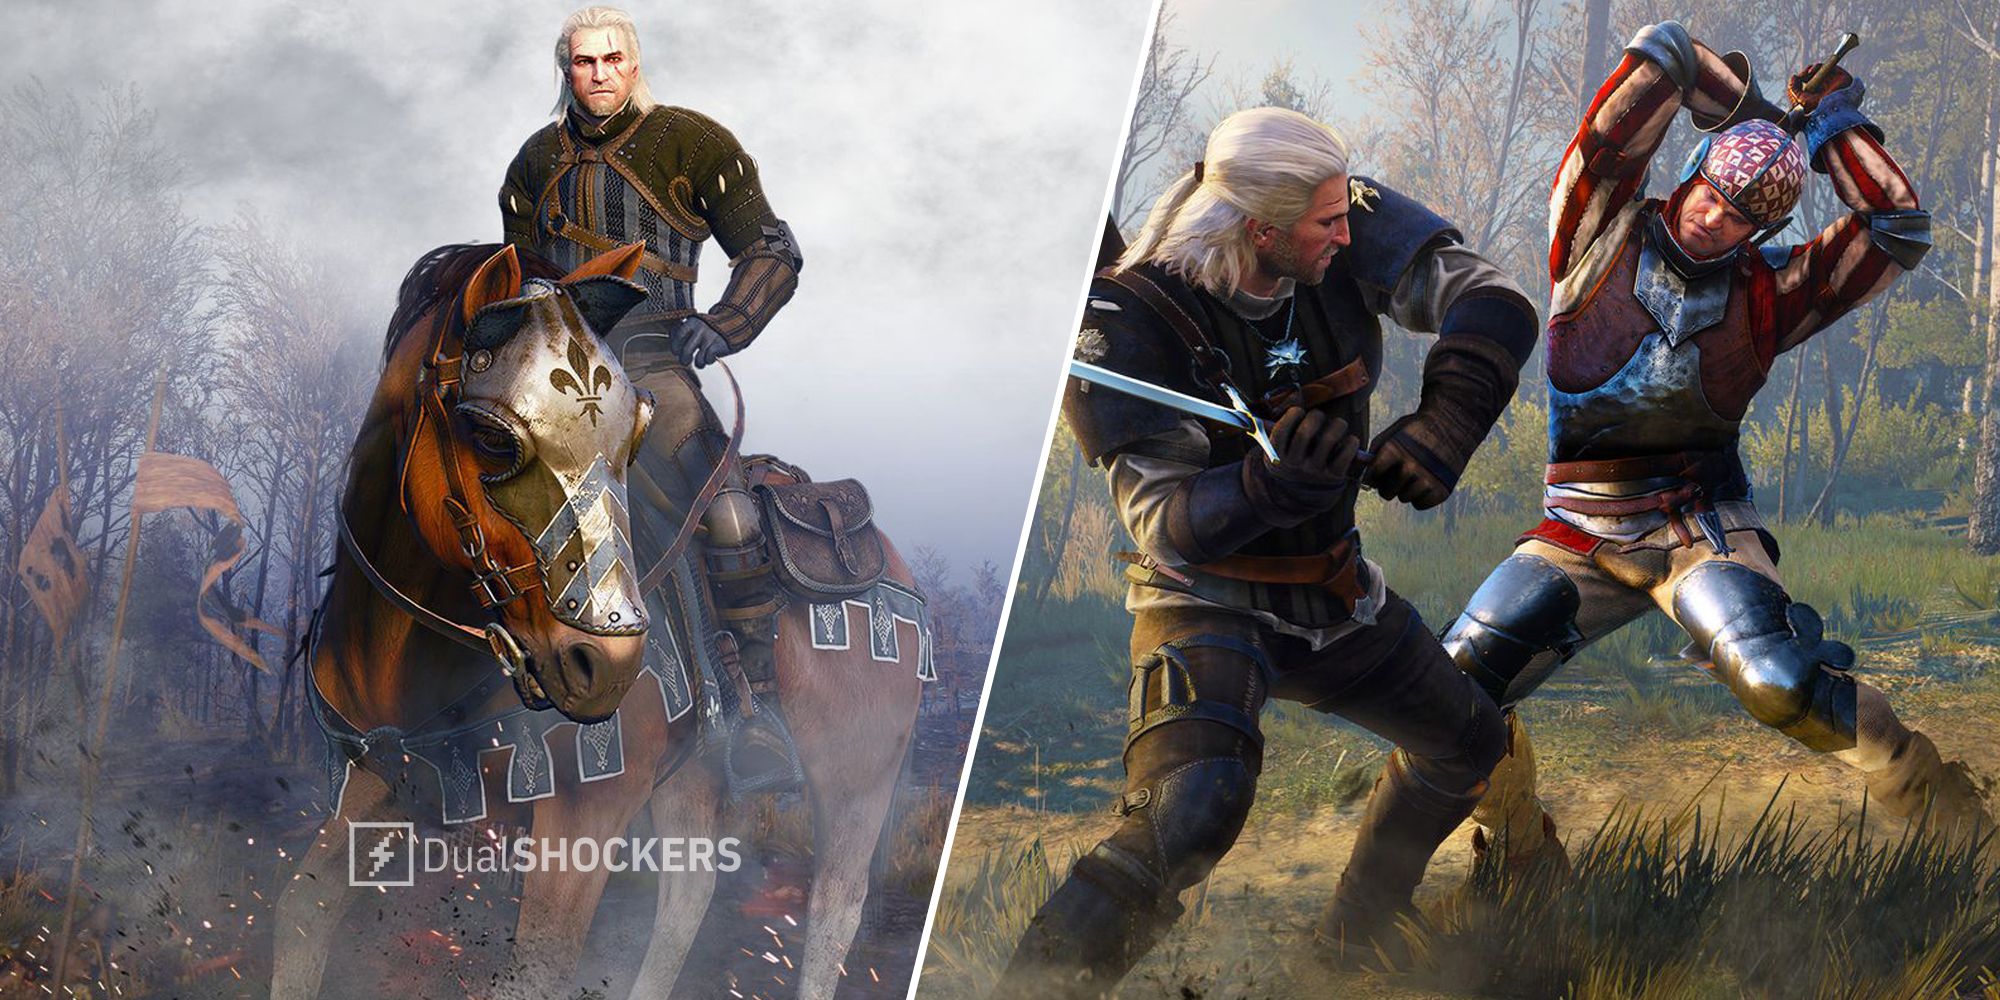 The Witcher 3' next-gen patch notes reveal 6 mods being added